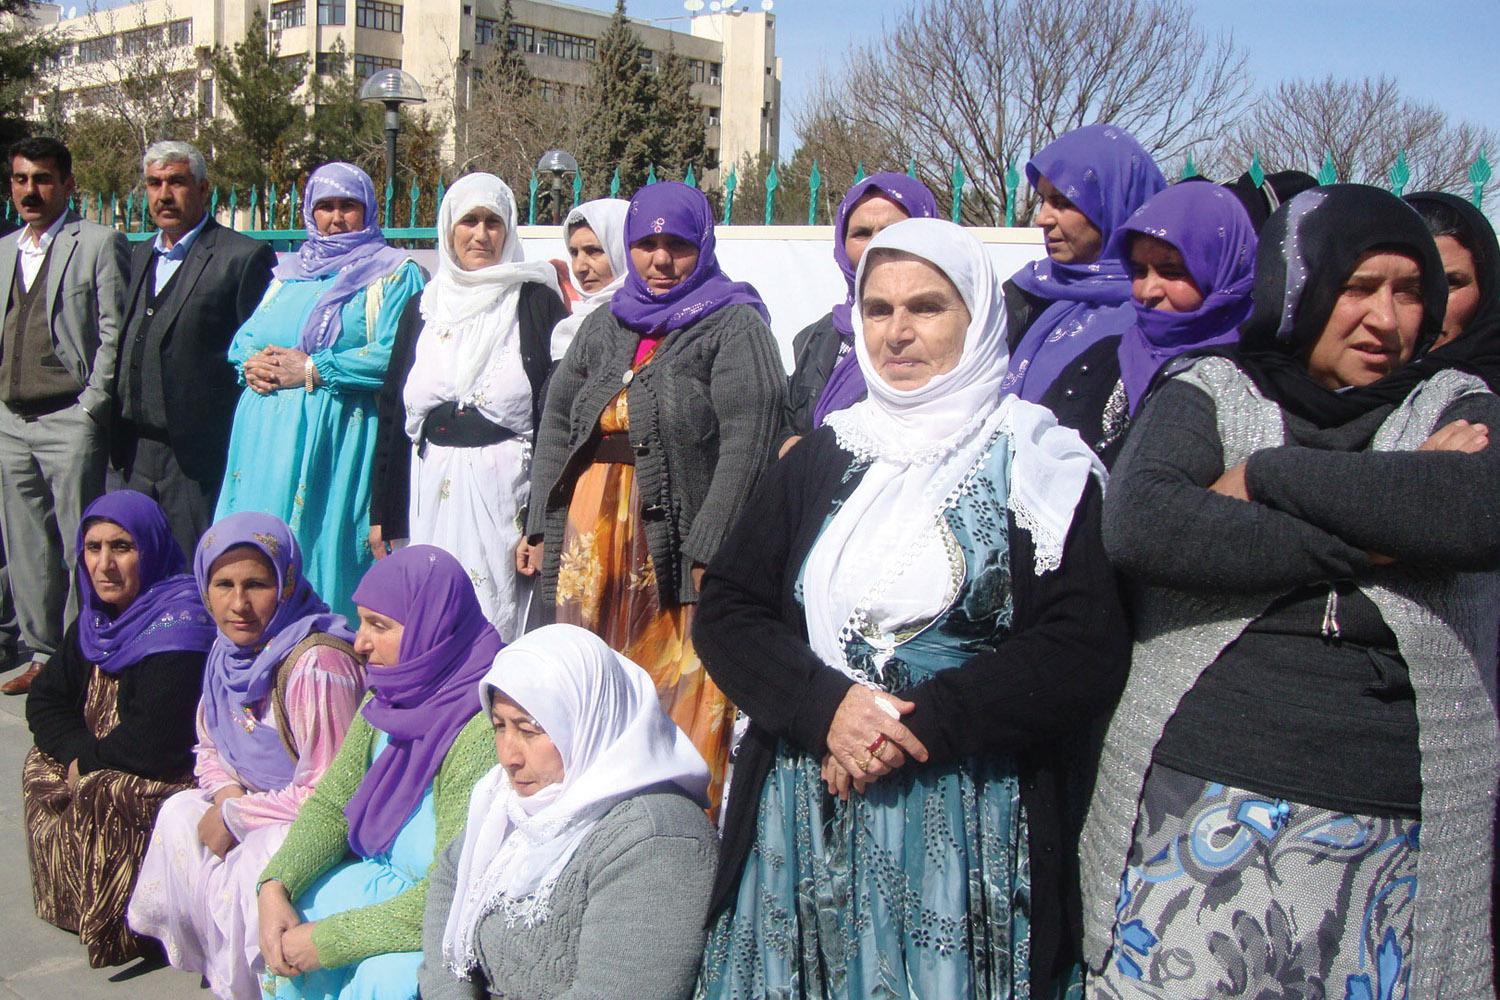 Relatives of victims assemble before a court hearing in Diyarbakır, March 2012, during the trial of a former gendarmerie officer and six others for 20 killings and disappearances between 1993 and 1995 in Southeast Turkey.